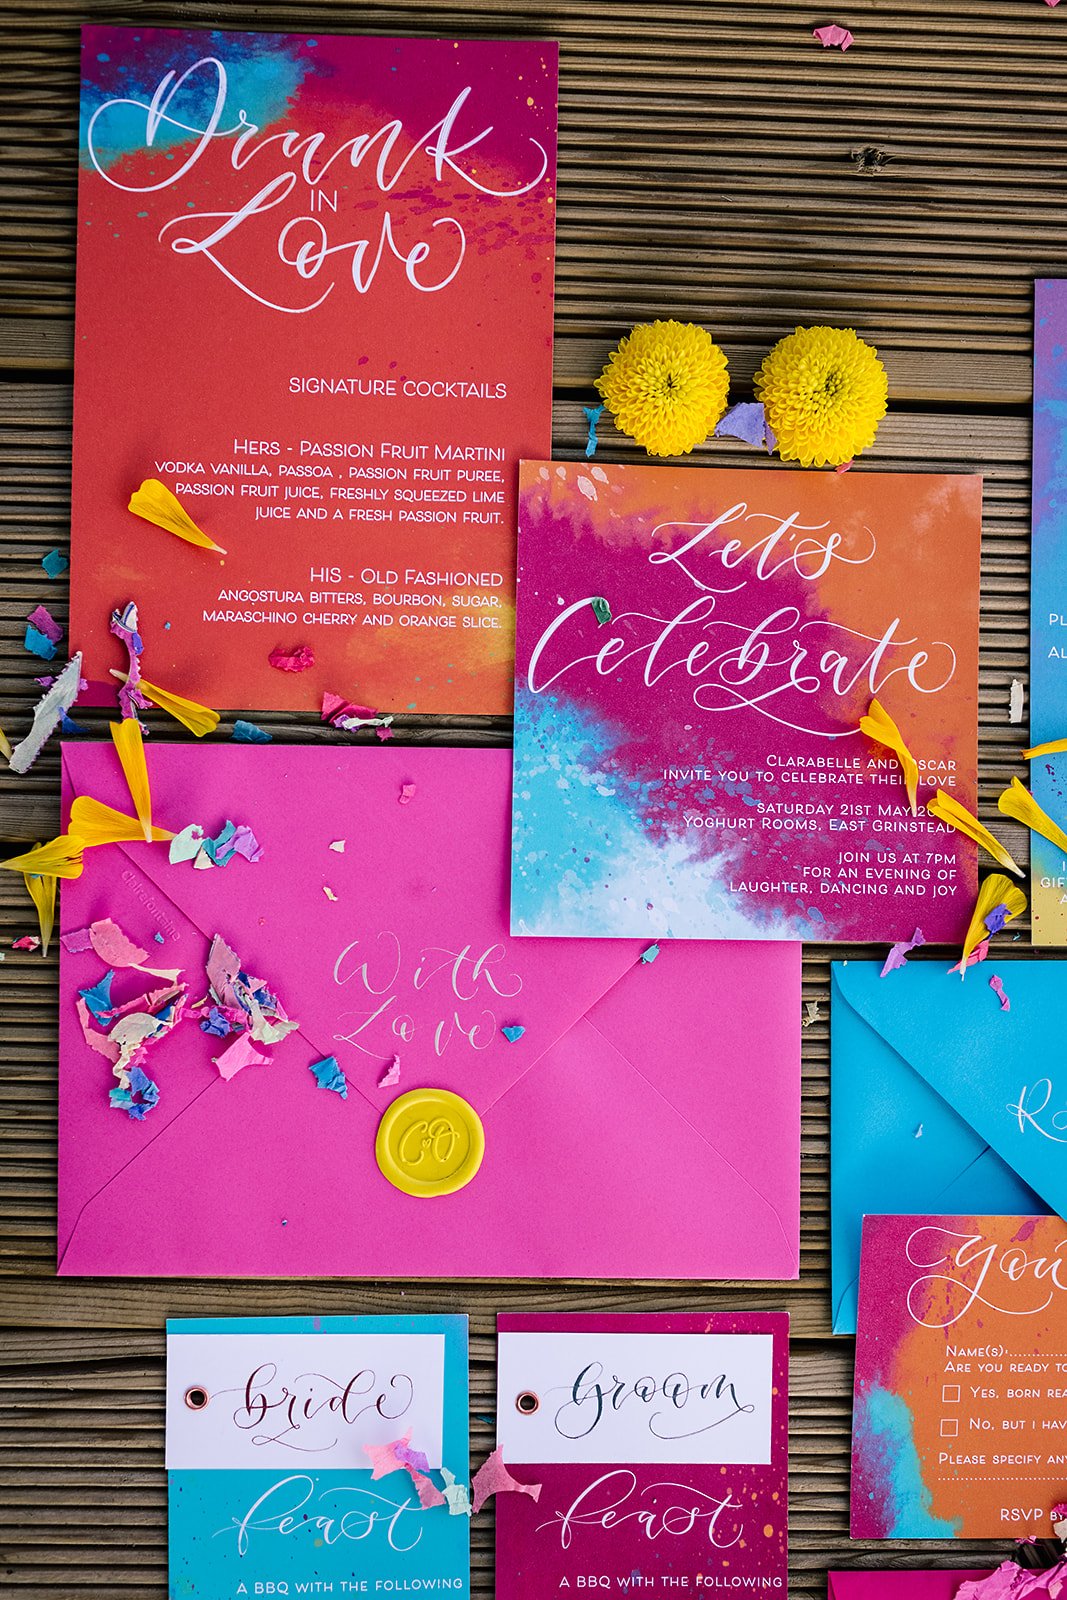 Festival wedding stationery watercolour wedding stationery with hot pink orange and blue,calligraphy, custom wax seals and calligraphy envelopes drunk in love drinks menu.jpg